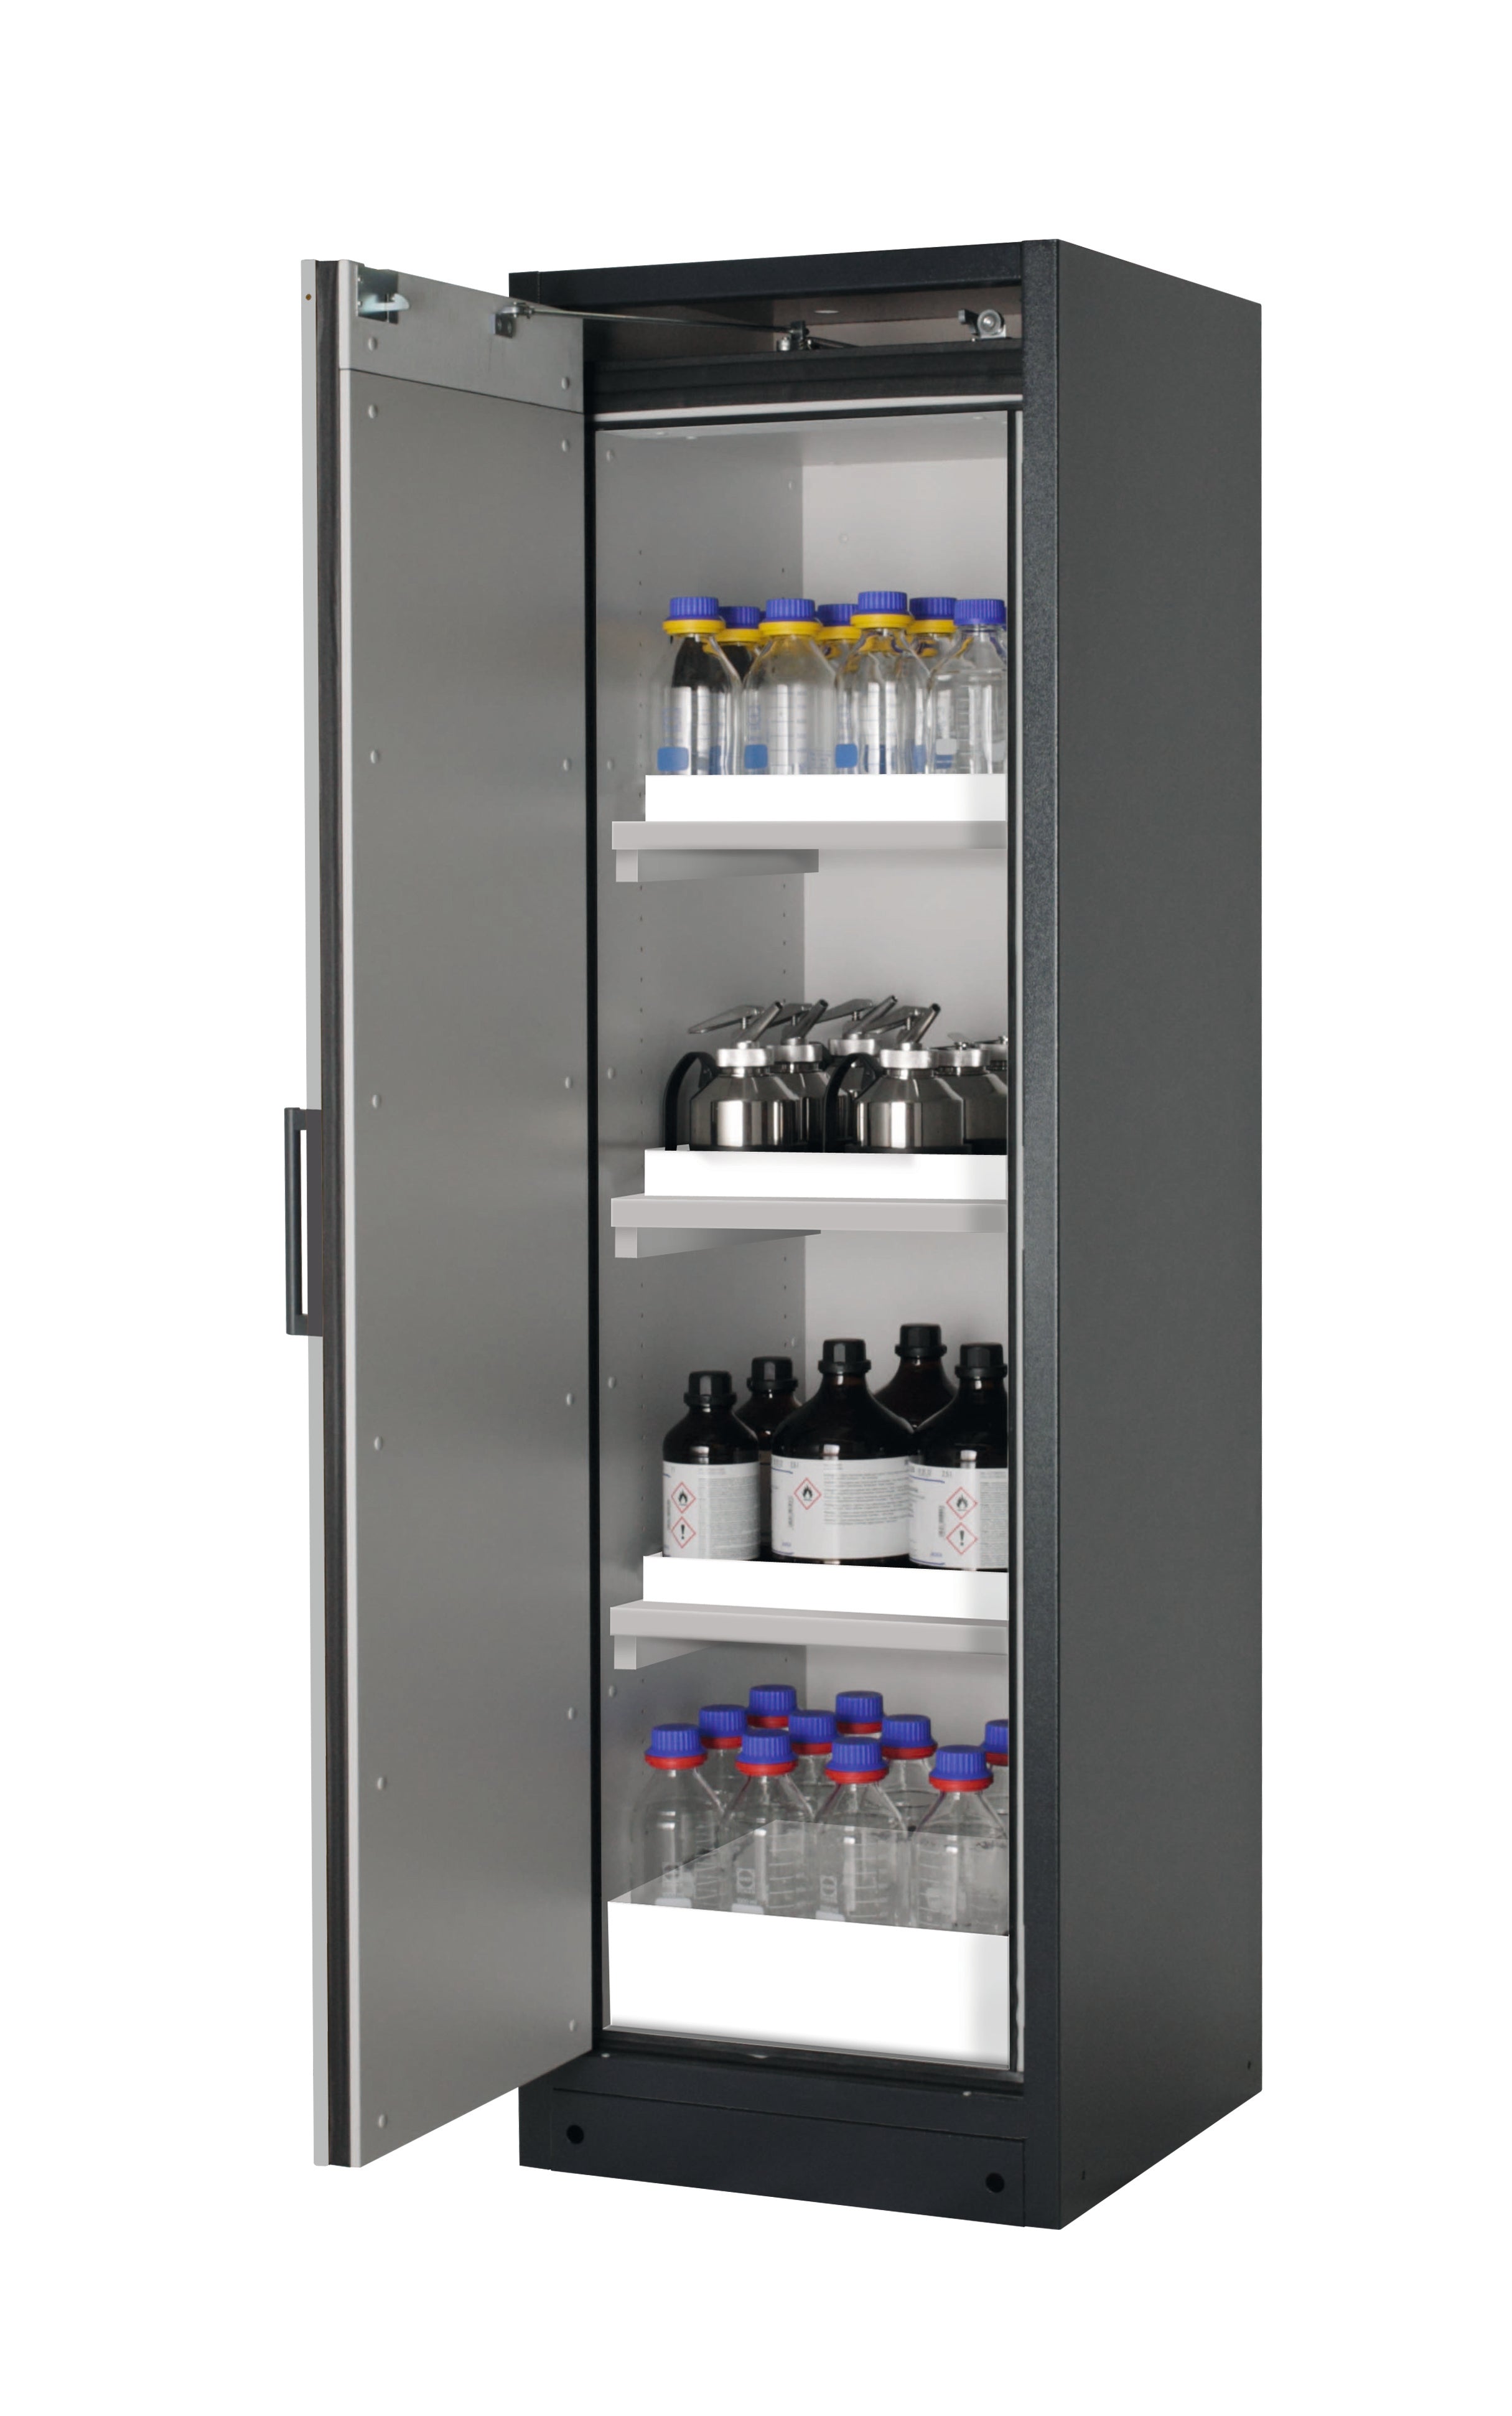 Type 90 safety storage cabinet Q-PEGASUS-90 model Q90.195.060.WDAC in pure white RAL 9010 with 3x tray shelf (standard) (polypropylene),